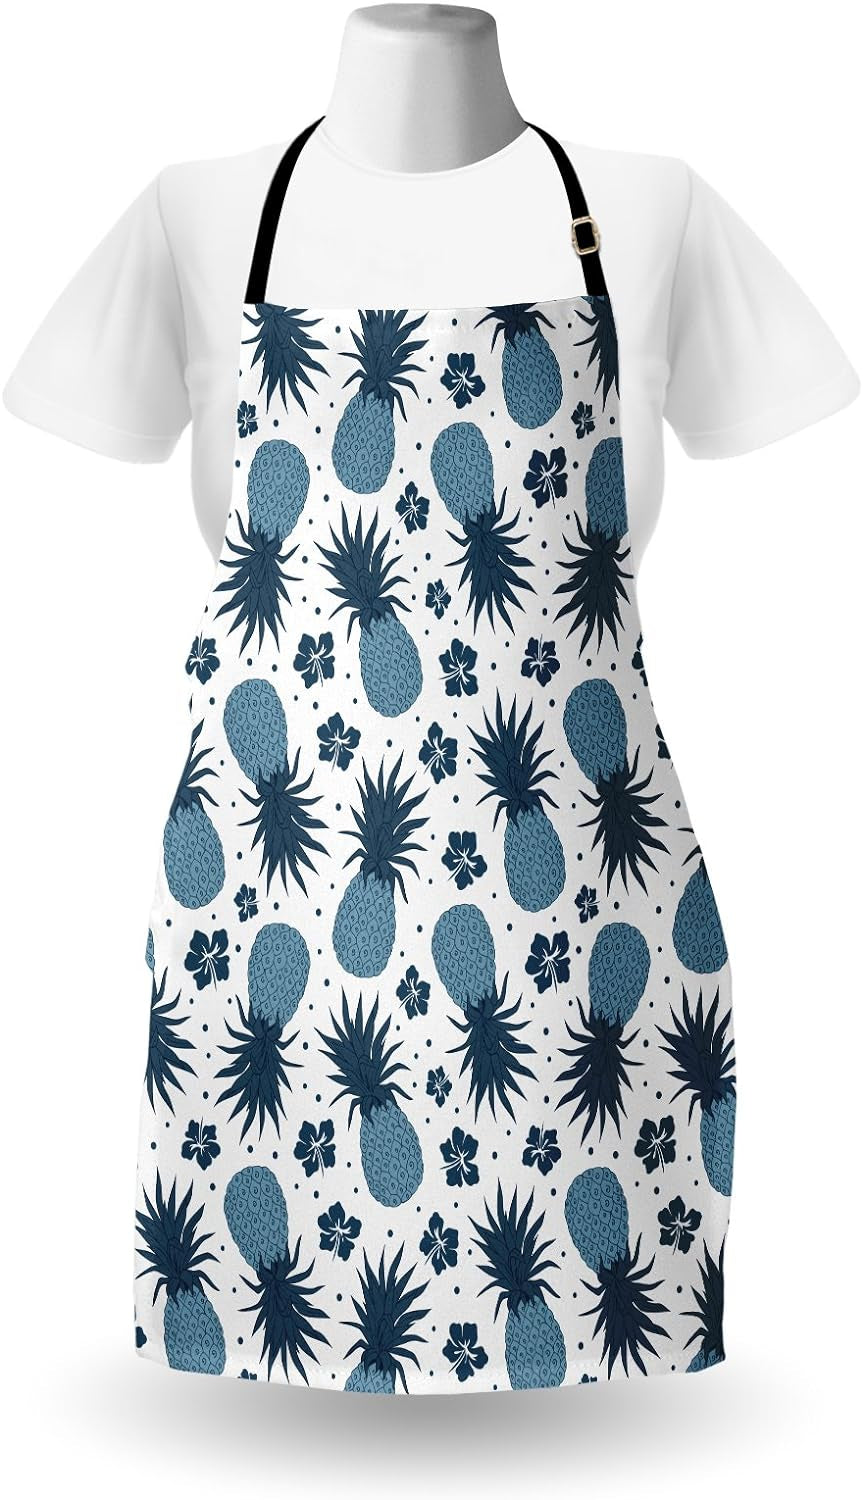 Pineapple Apron, Adult Size, Blue White